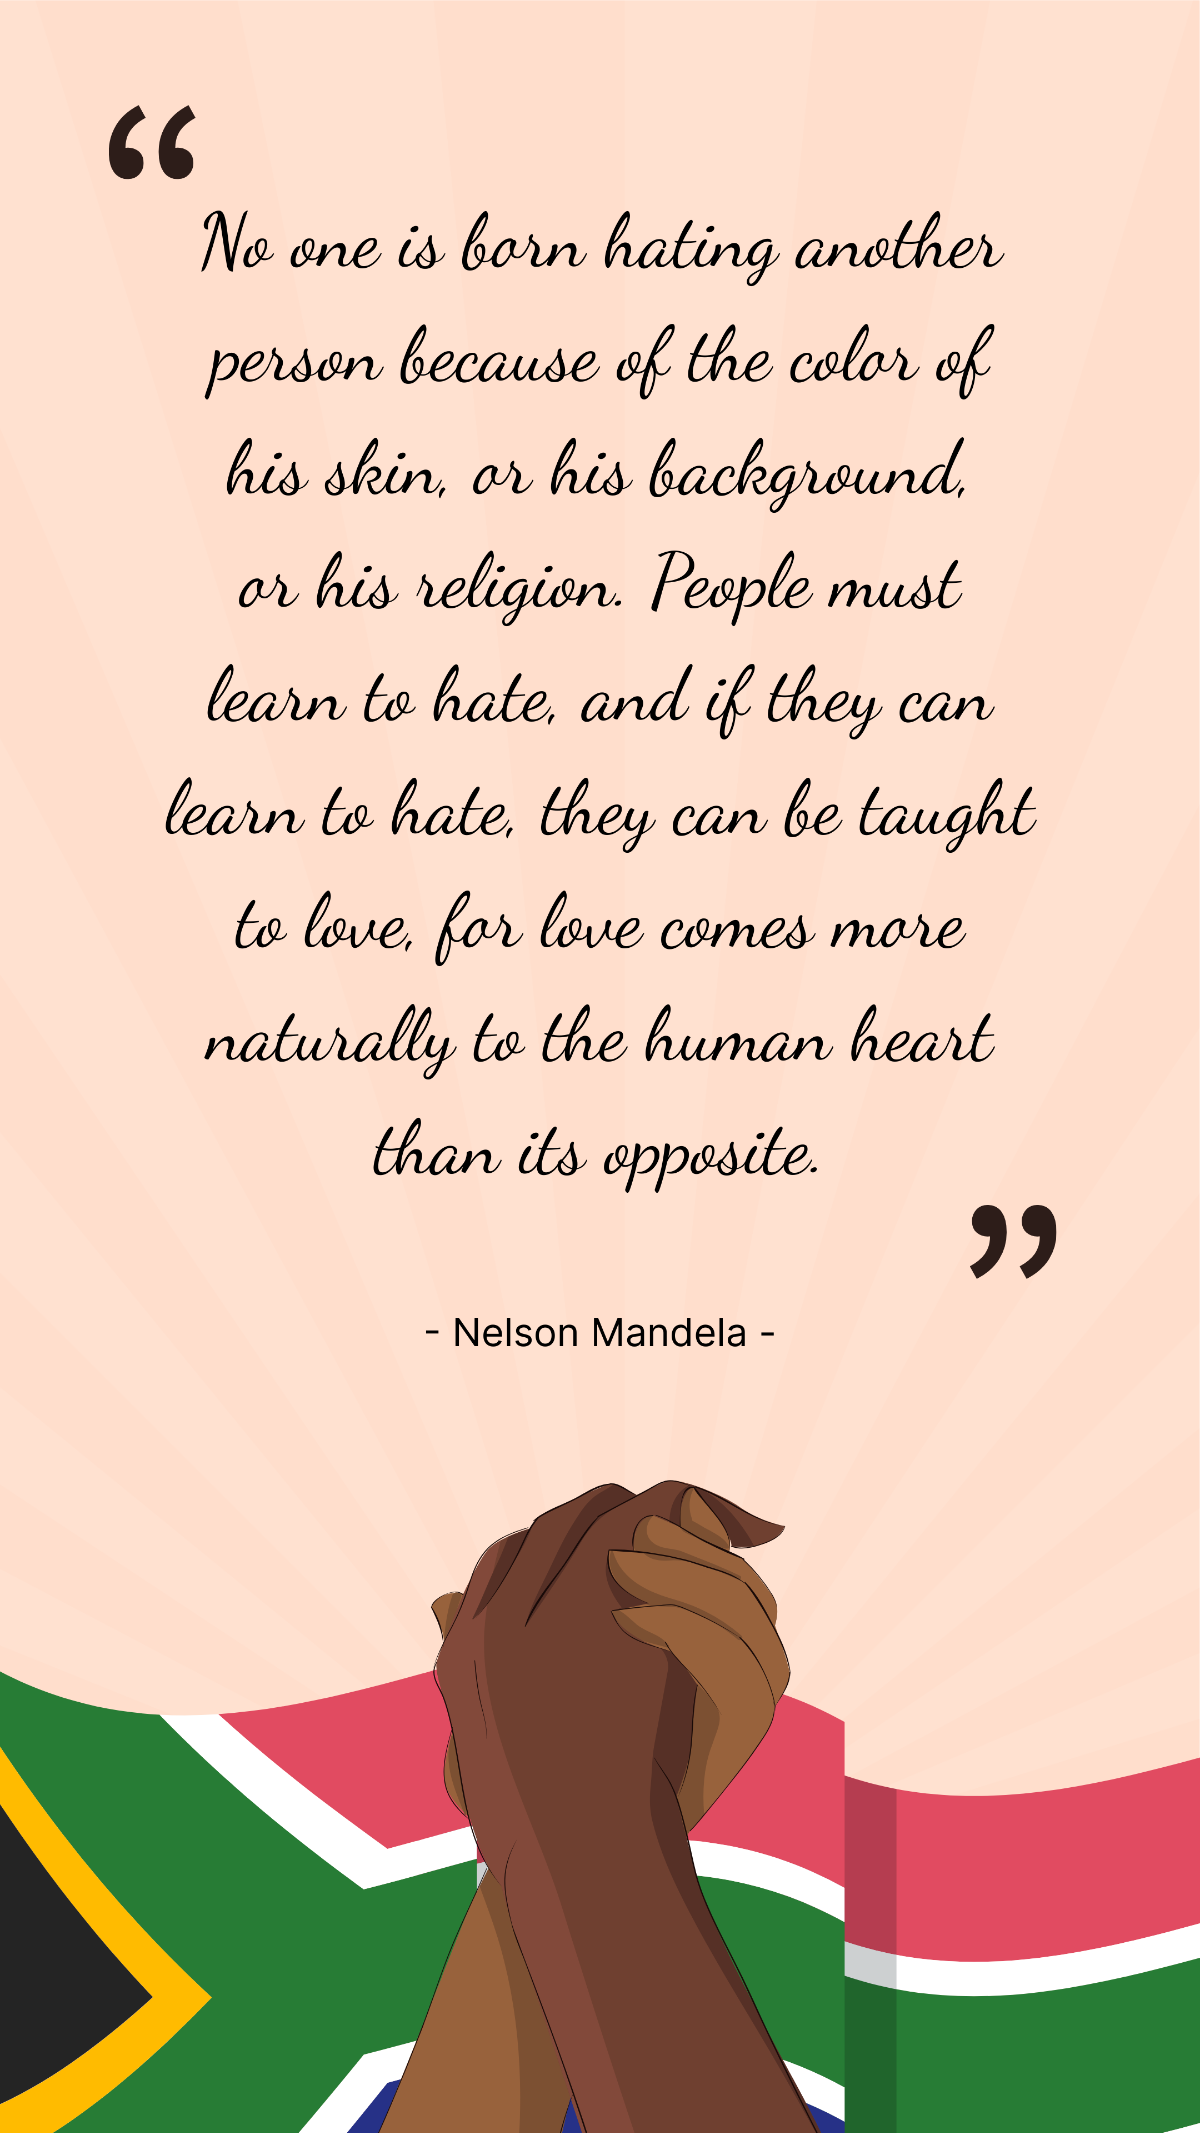 Nelson Mandela Quote about Love